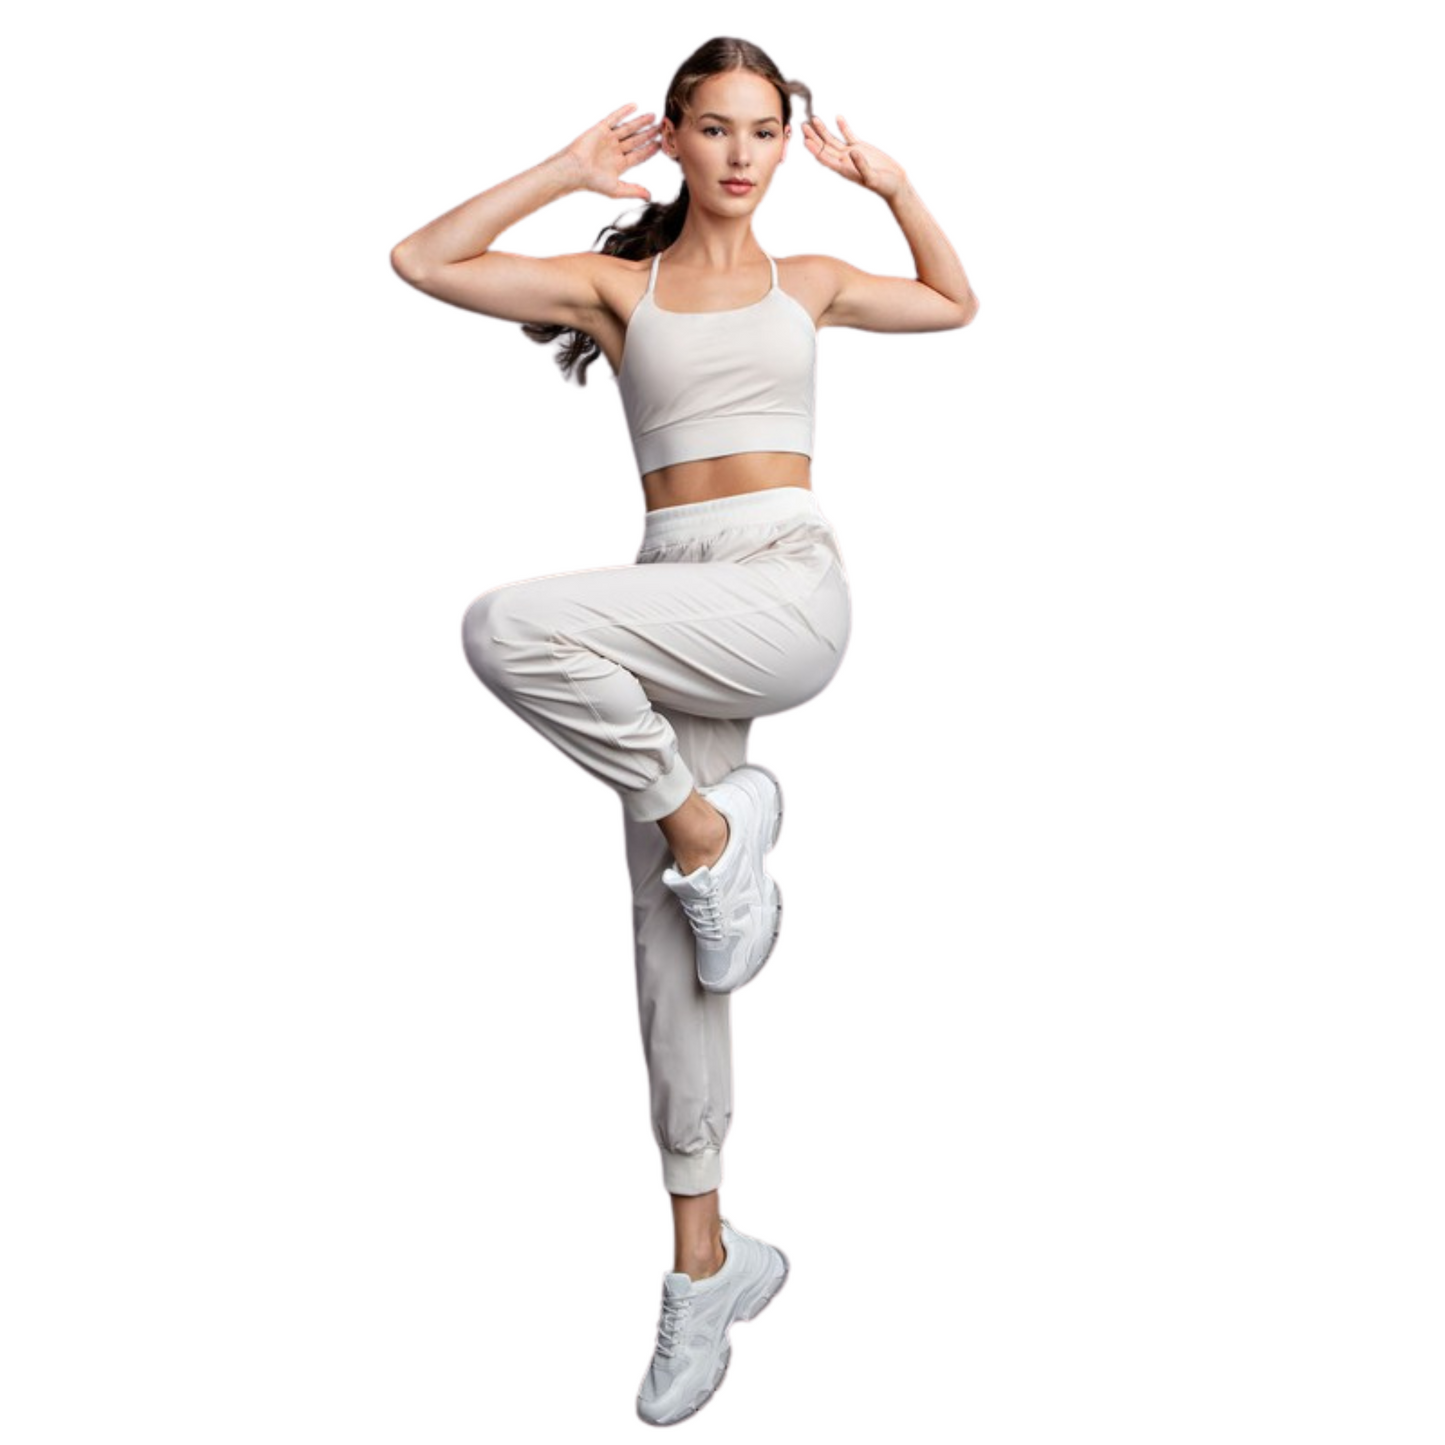 Take your workout to the next level with our Oxford Mid Rise Joggers. Crafted from durable Oxford St Woven fabric, these Dance Studio inspired jogger pants provide maximum comfort and flexibility. With a flattering mid rise fit and timeless bone color, these joggers are the perfect addition to your fitness wardrobe.